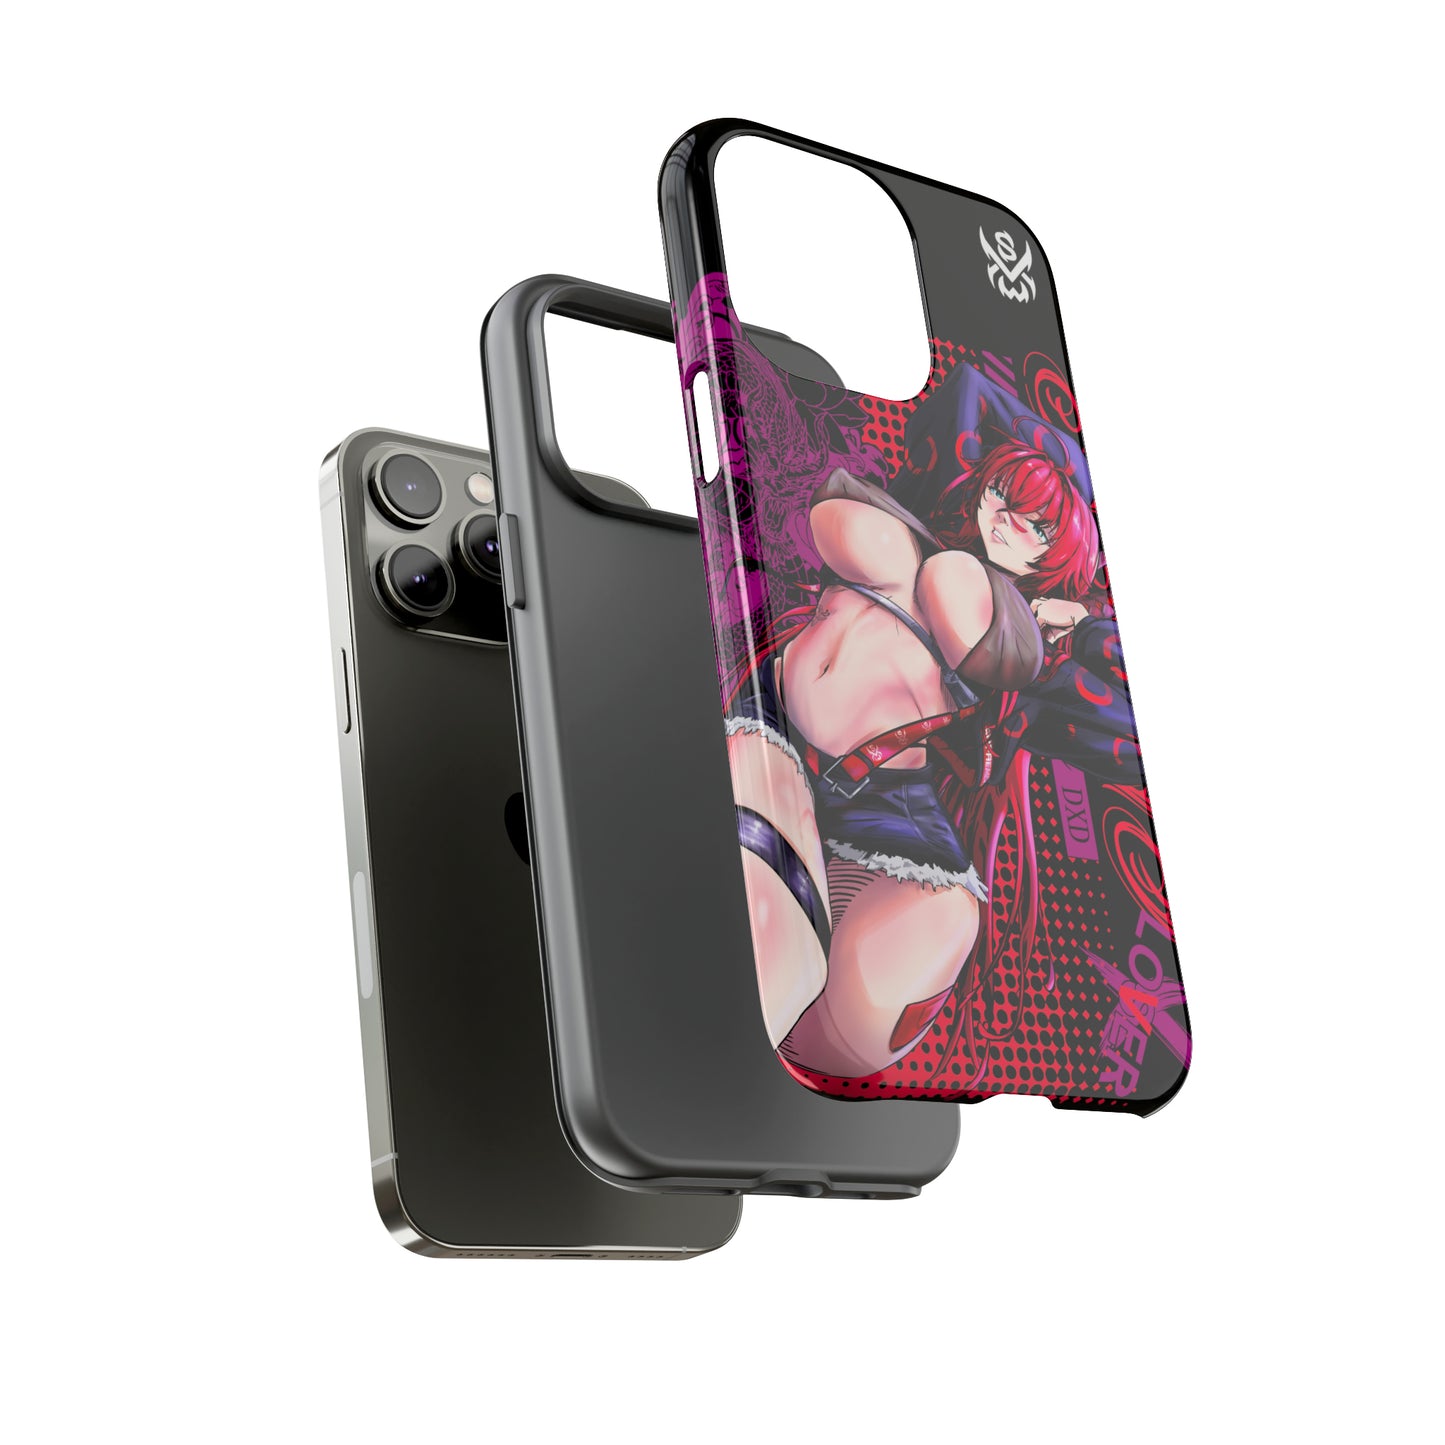 RIAS / iPhone Cases - LIMITED